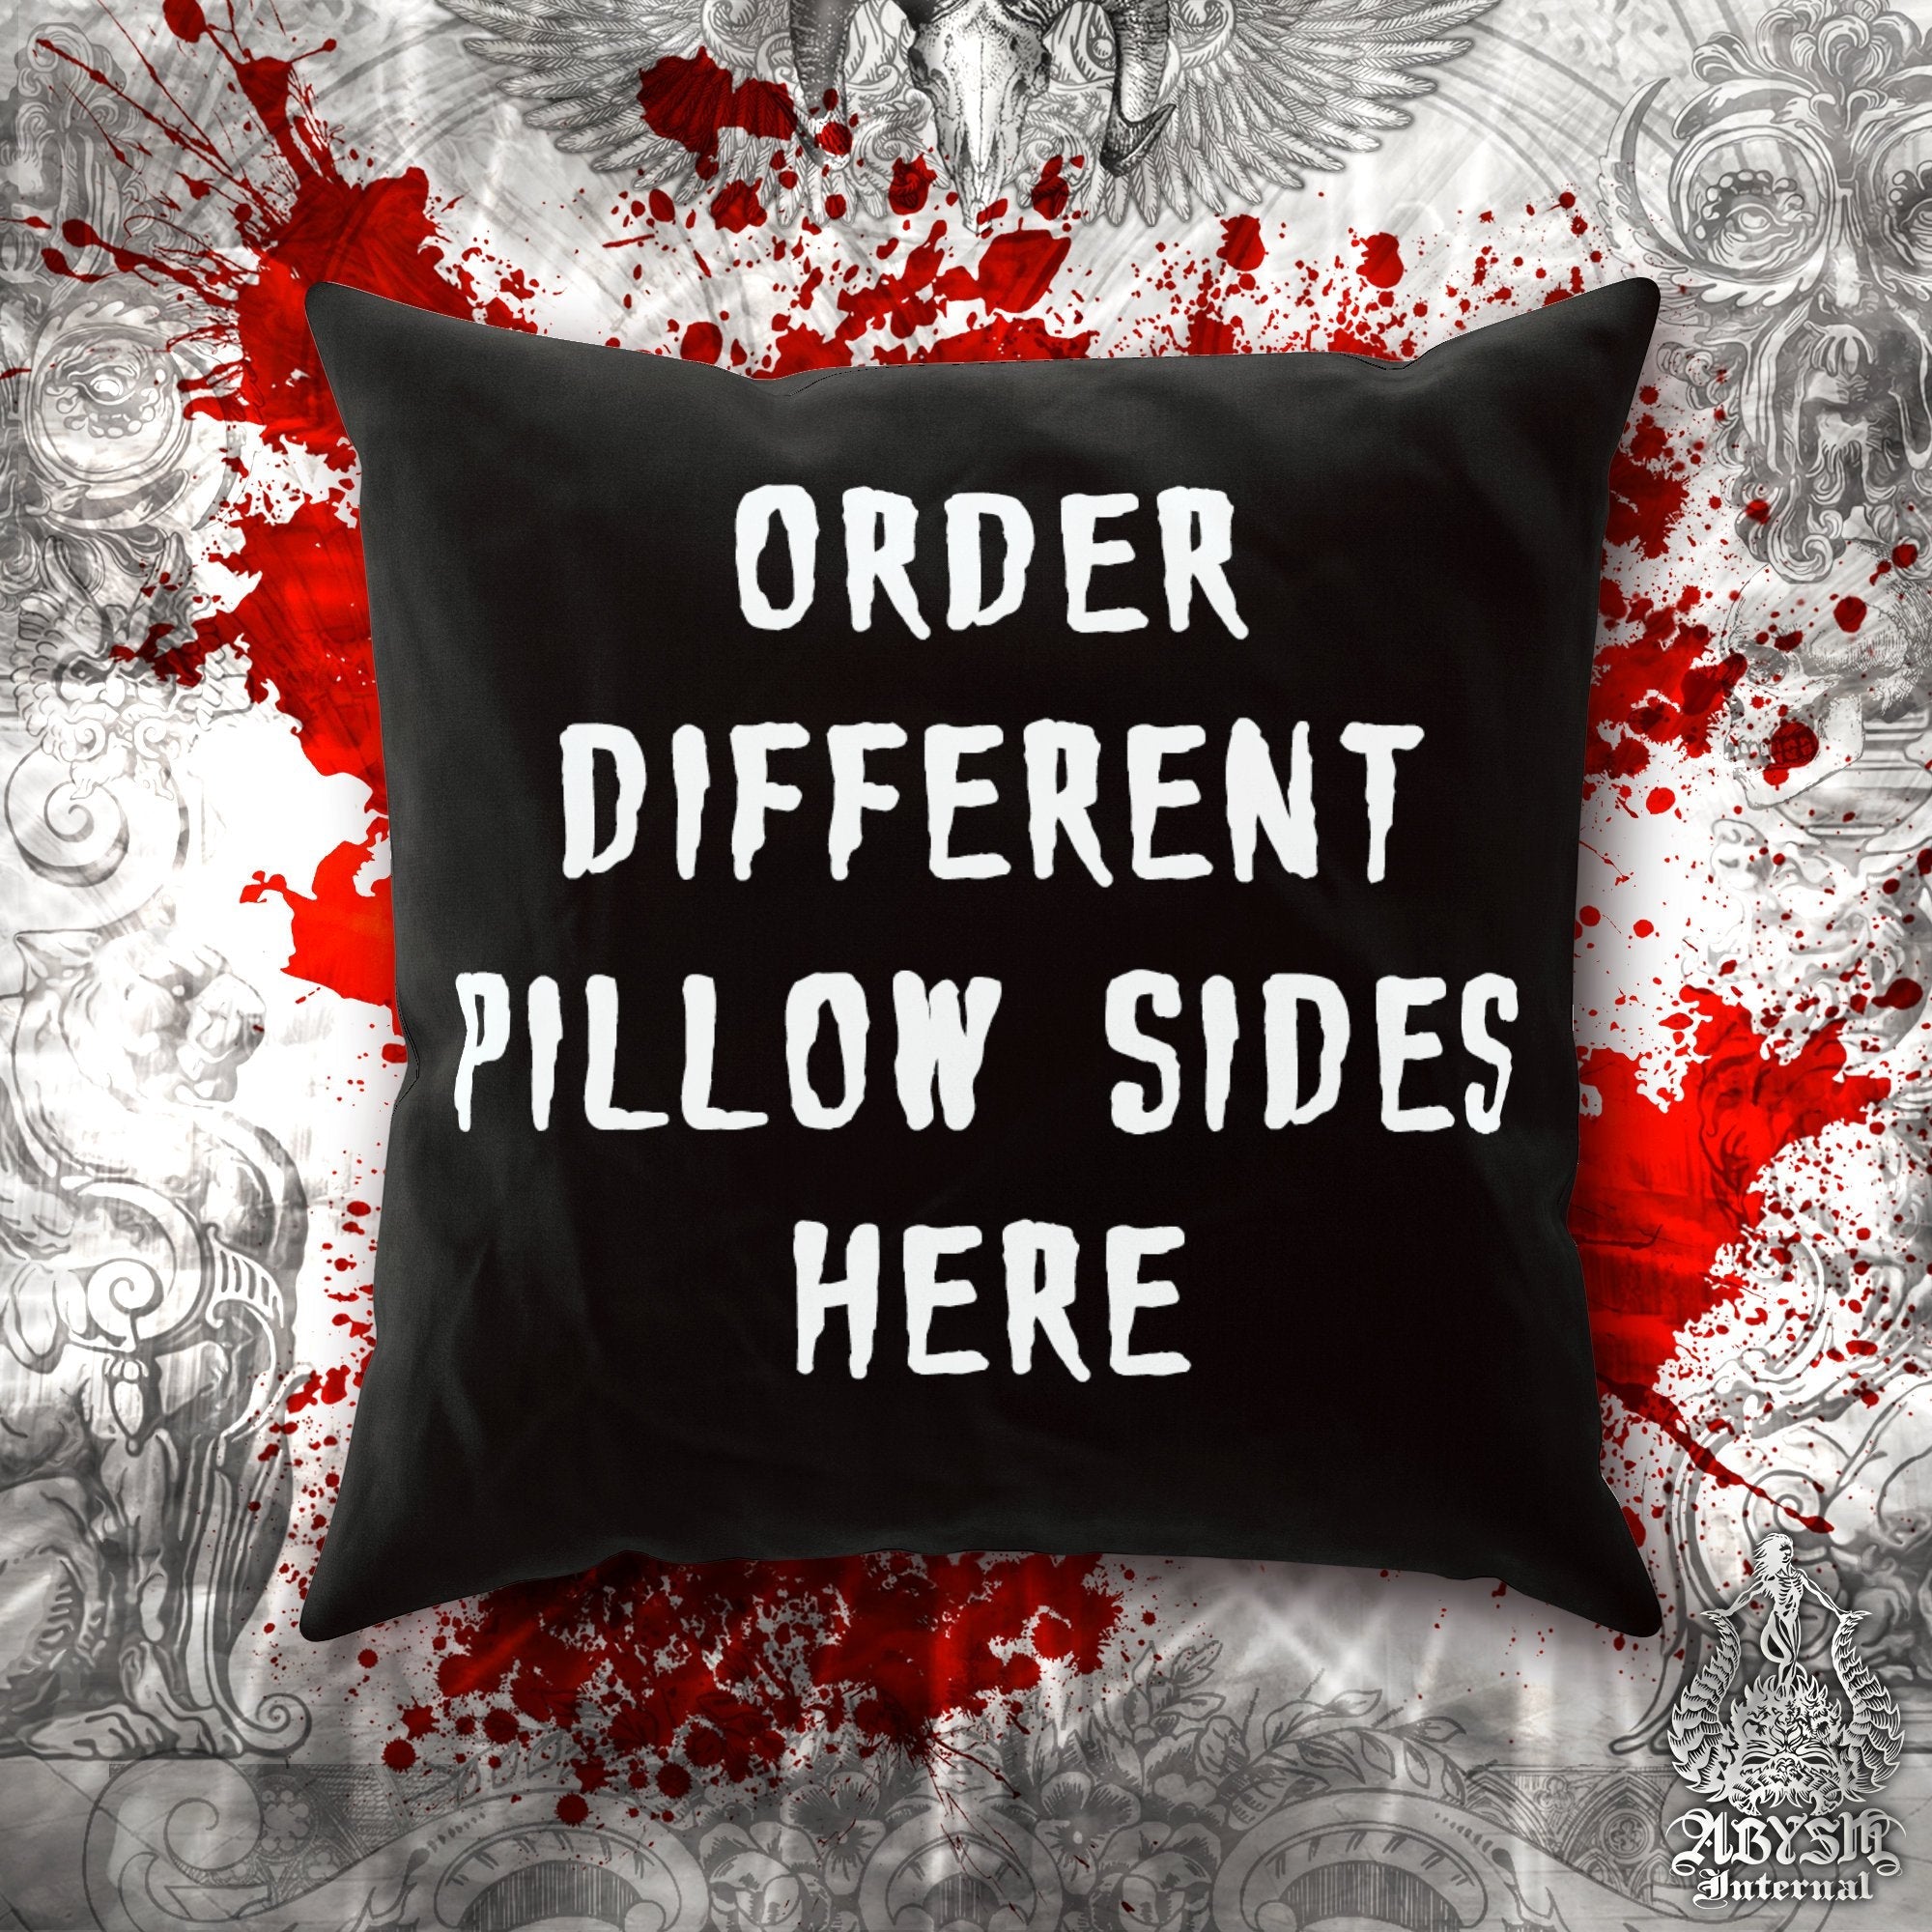 Order Here Throw Pillows with Different Sides - Custom Sides - Abysm Internal